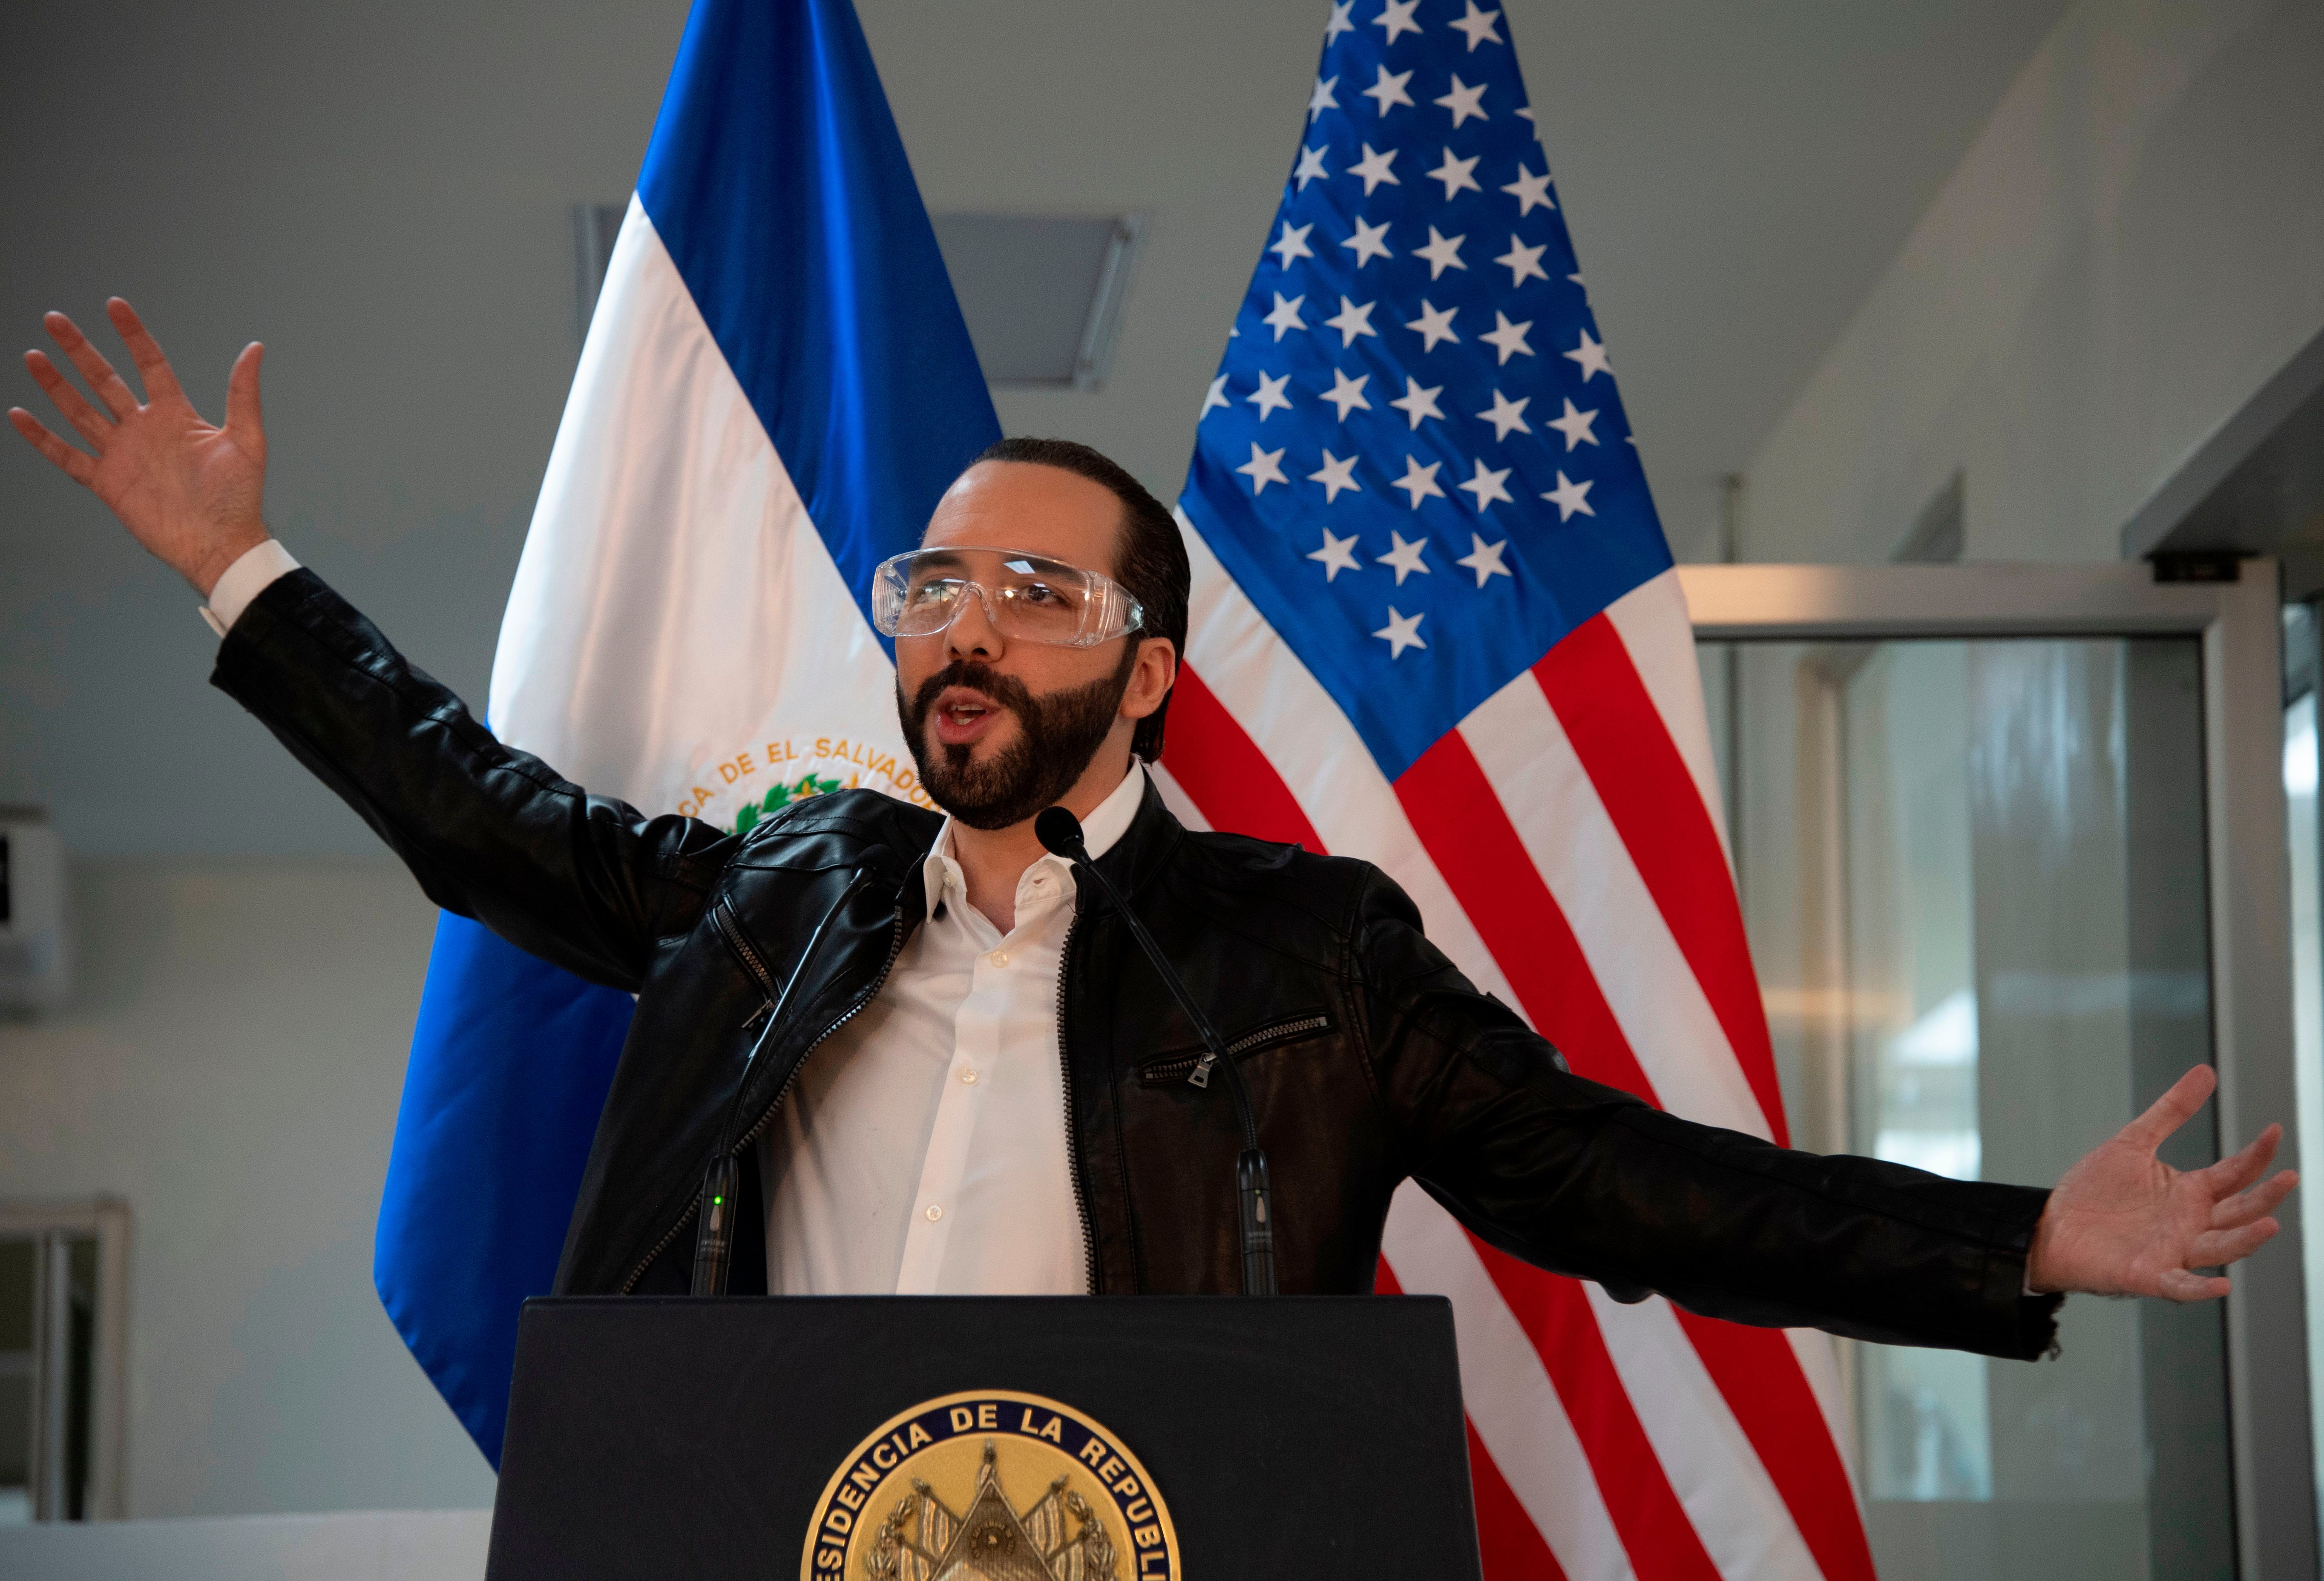 El Salvador’s president Nayib Bukele, accompanied by US Ambassador to El Salvador Ronald Johnson (out of frame), speaks during a joint press conference at Rosales Hospital in San Salvador